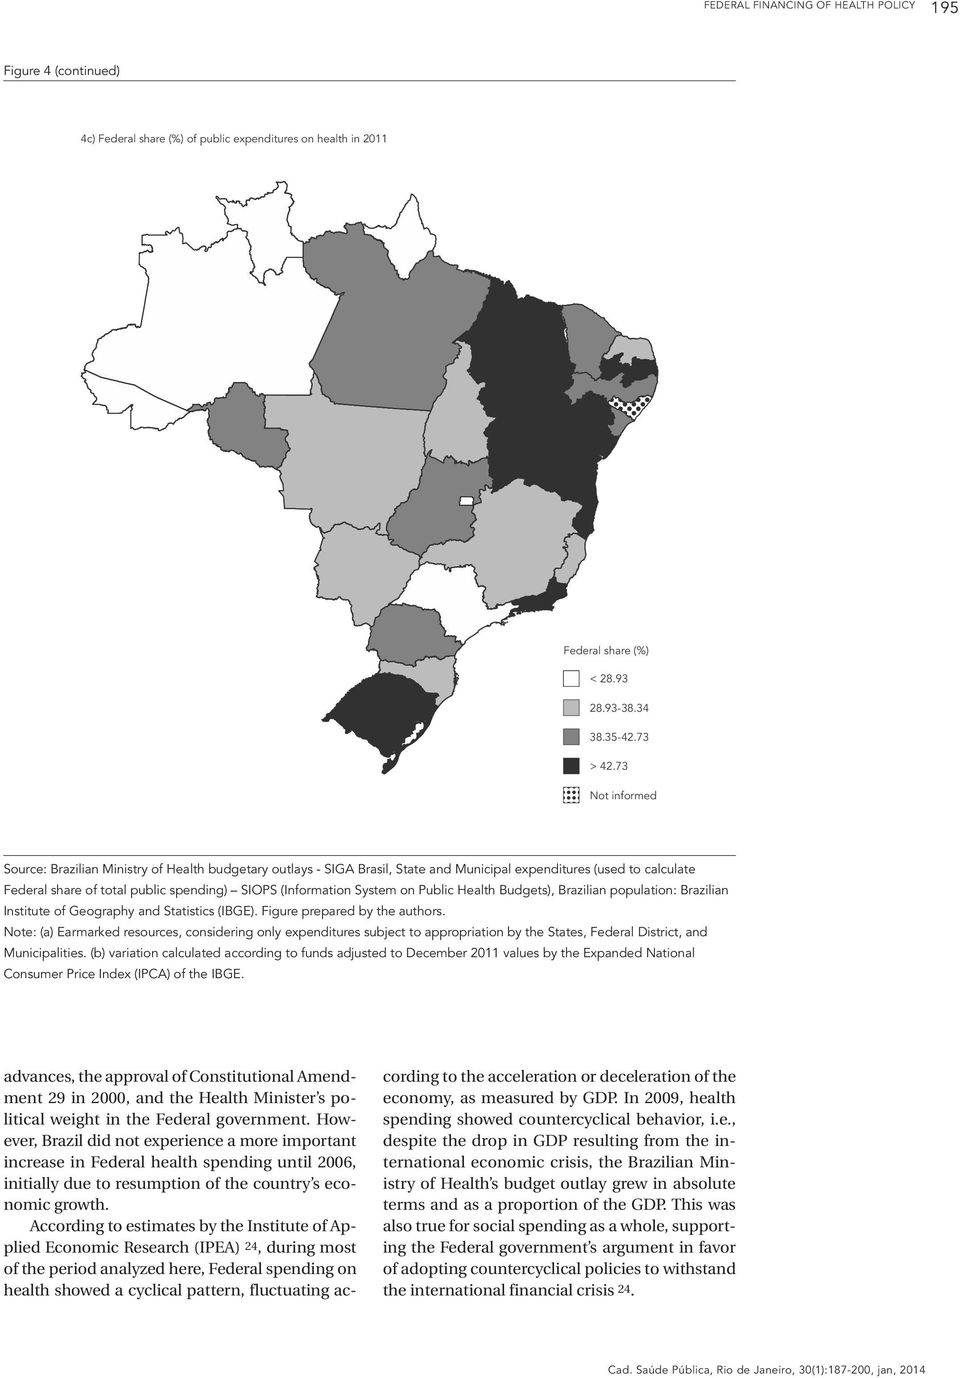 System on Public Health Budgets), Brazilian population: Brazilian Institute of Geography and Statistics (IBGE). Figure prepared by the authors.